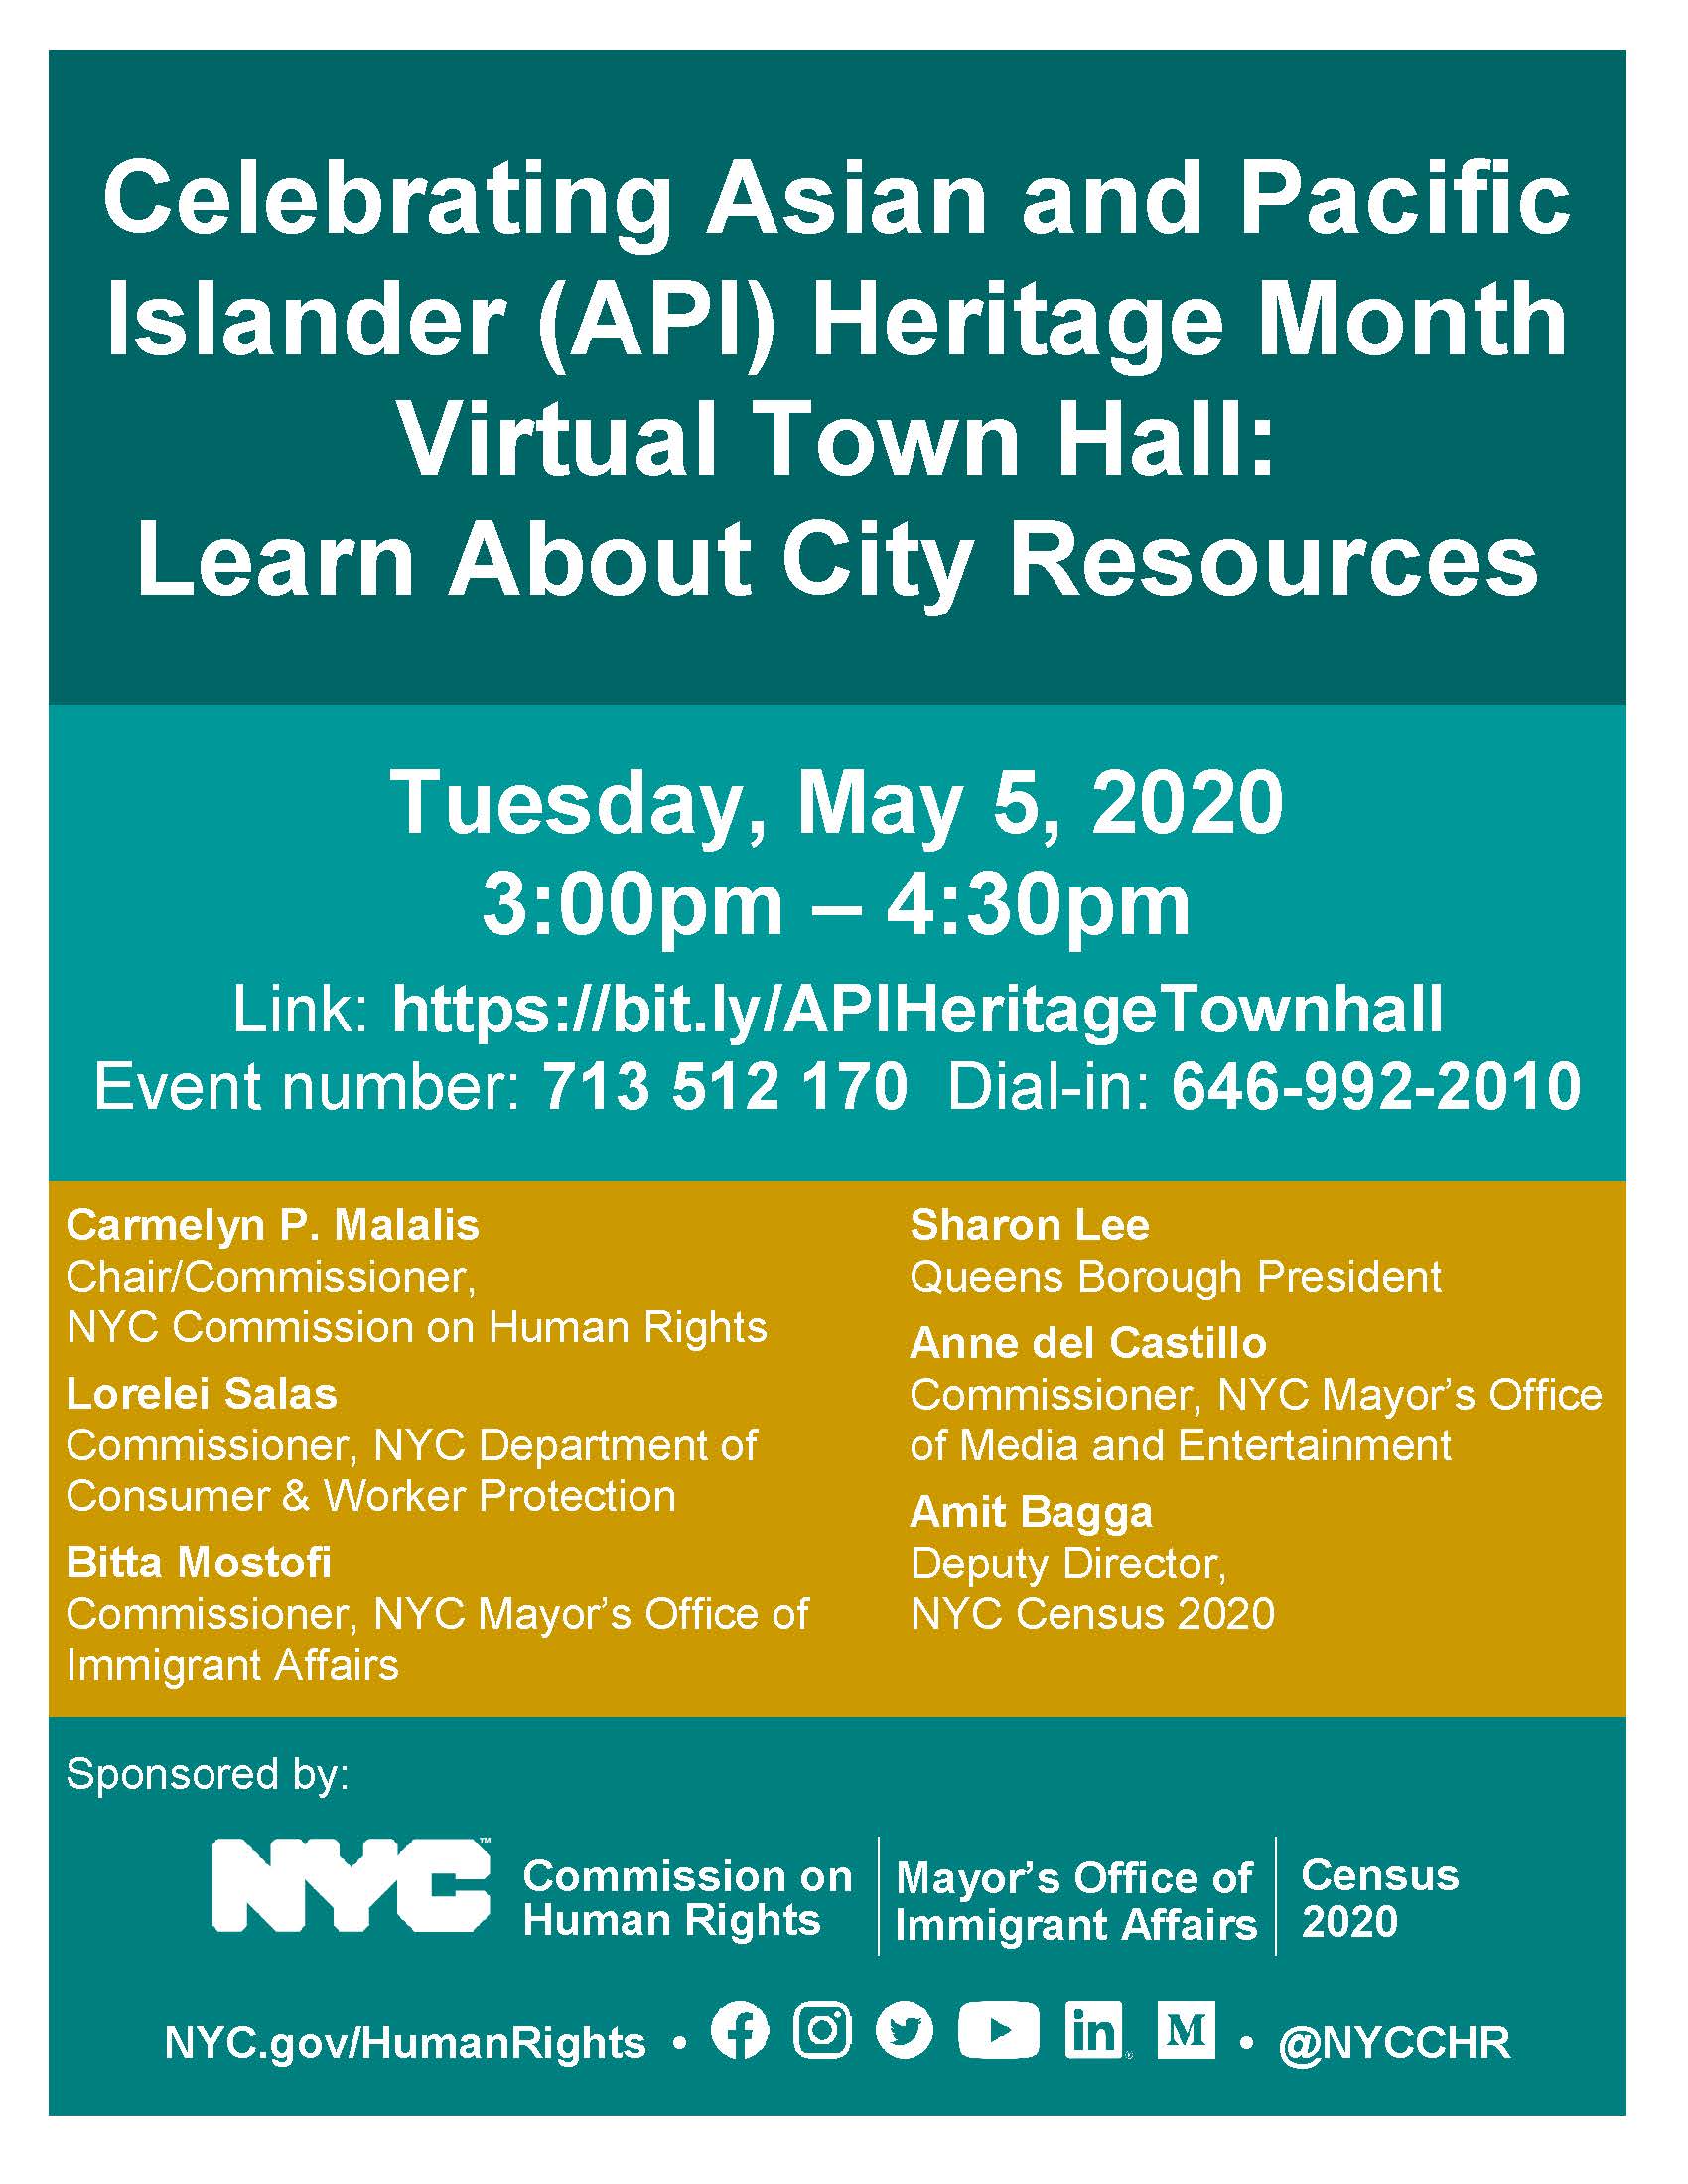 Celebrating Api Heritage Month Virtual Town Hall Learn About City